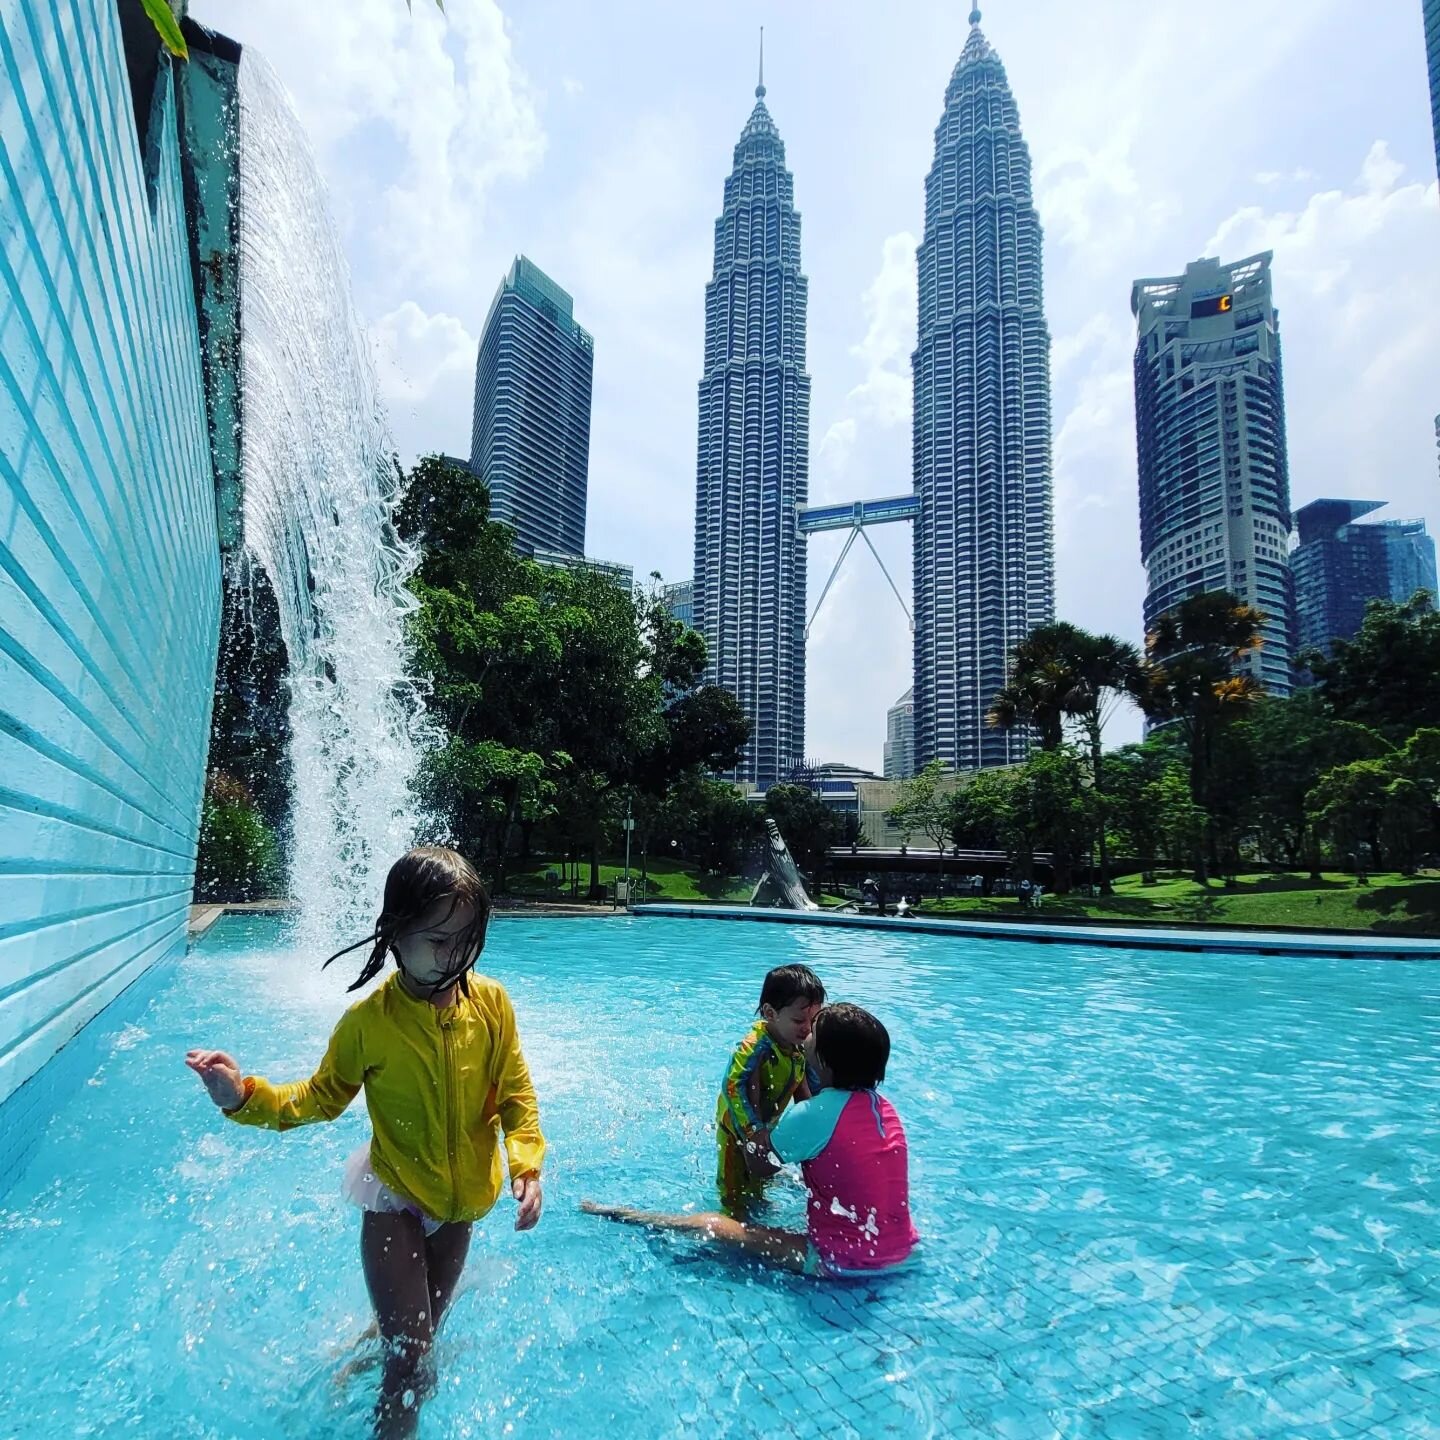 I am back and we had a blast in Malaysia! Here are some highlights of our trip.
Pics in order: Swimming by the famous Petronas Twin Towers, eating roti canai at a local mamak, spending time with my parents, visiting the dinosaur exhibit at the Nation